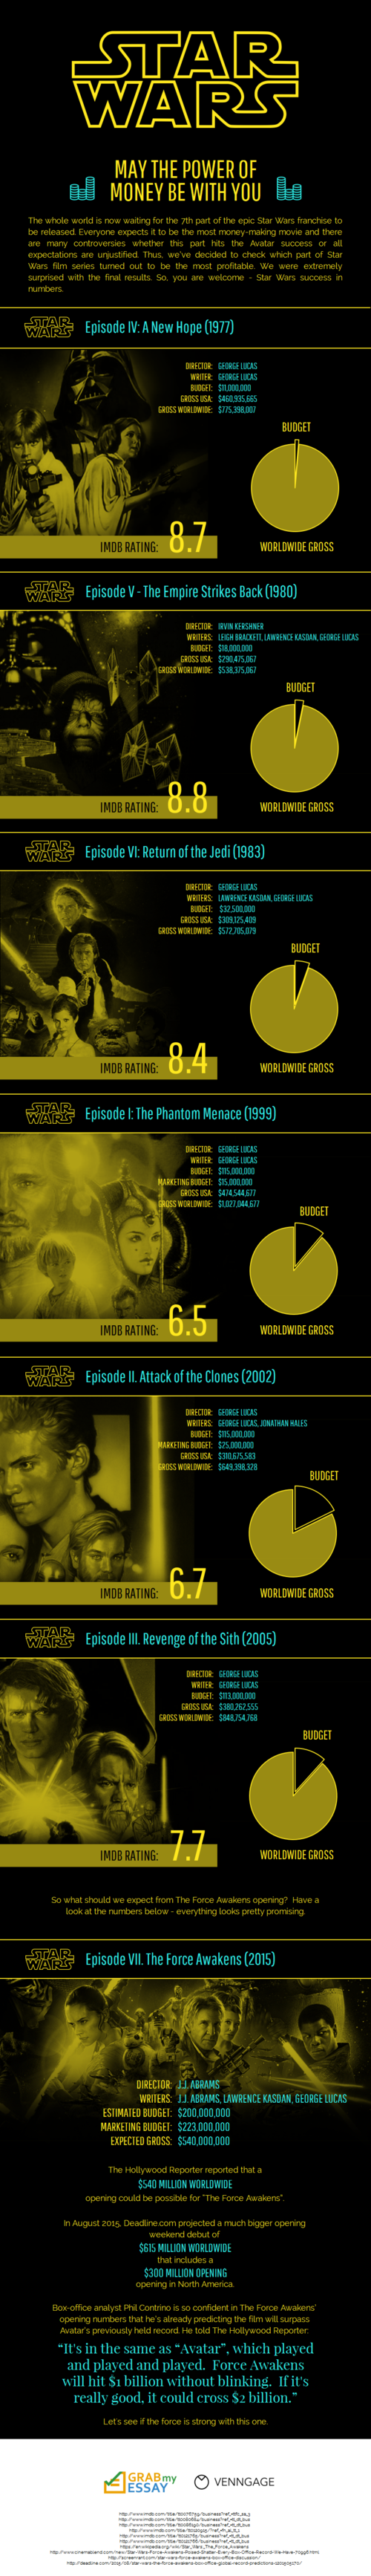 Star Wars - May The Power Of Money Be With You [Infographic]